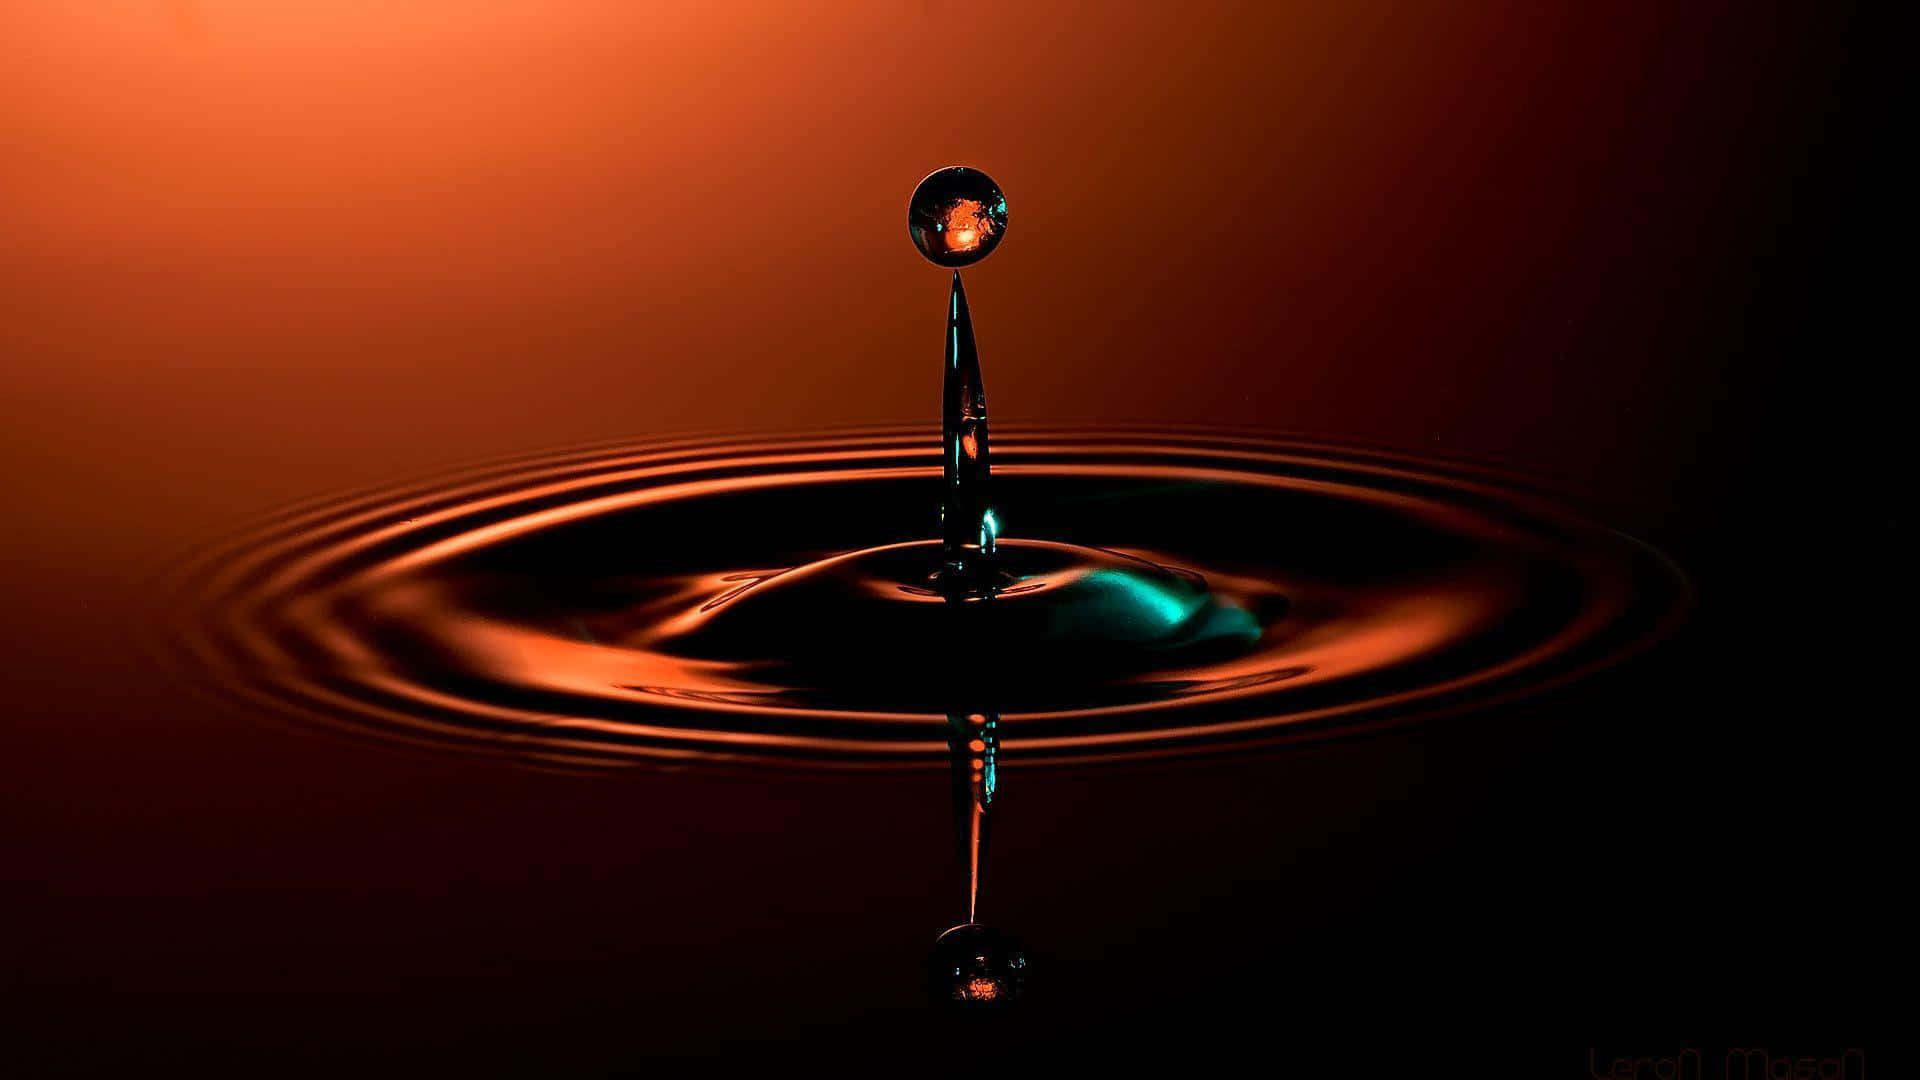 Nature's beauty - A magnificent water droplet